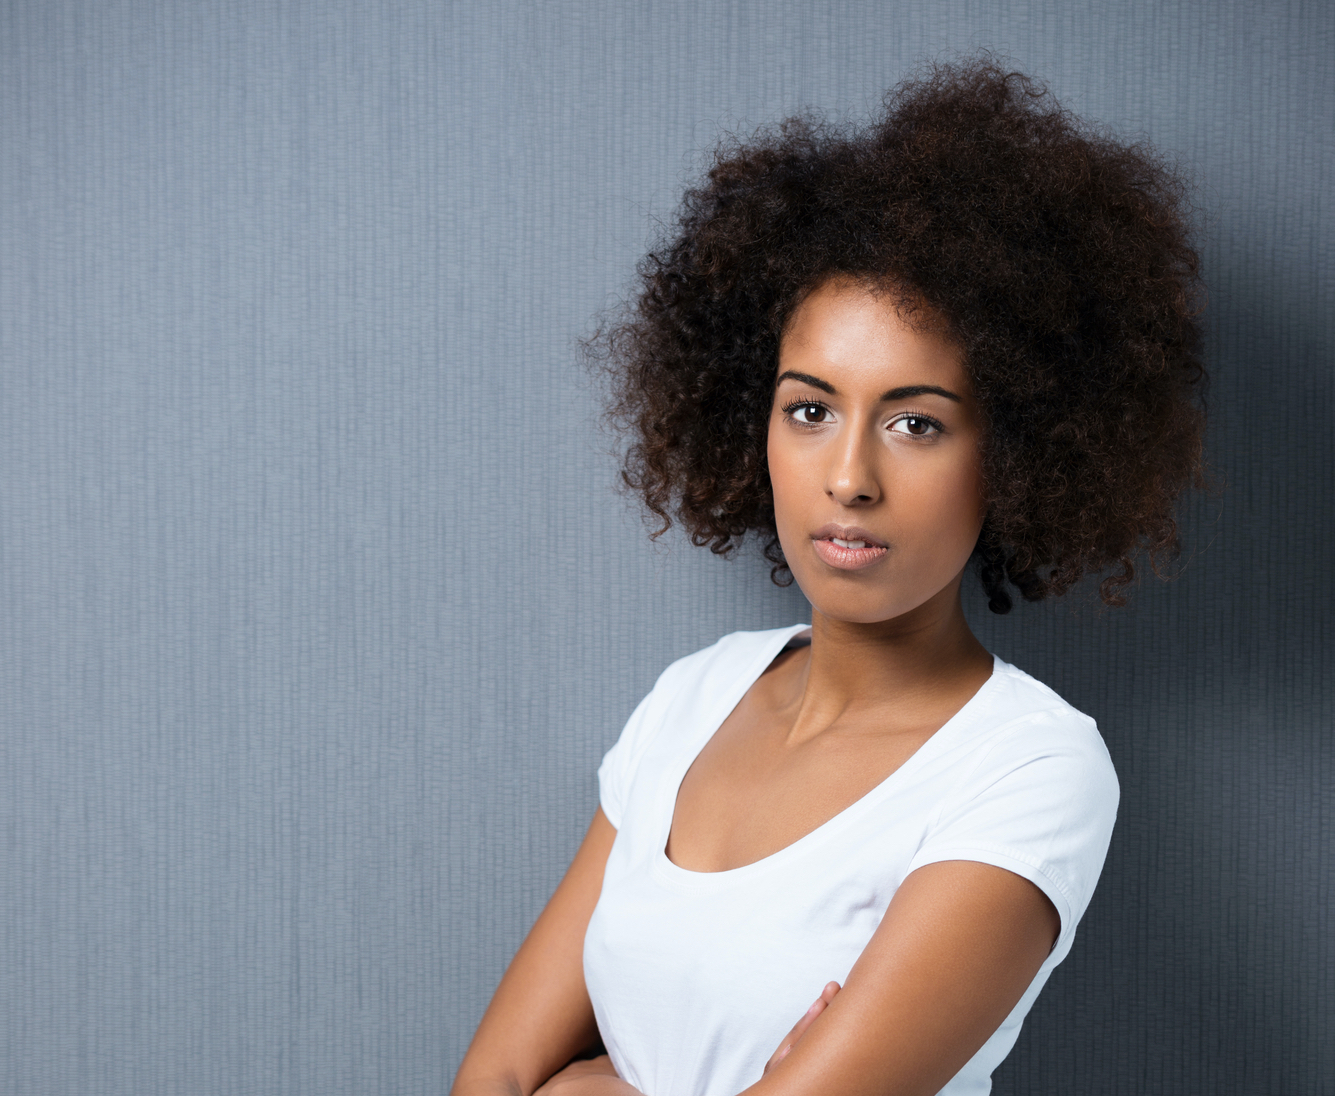 Black Women in USA with Natural Hairstyles are Less Likely to get Job Interviews